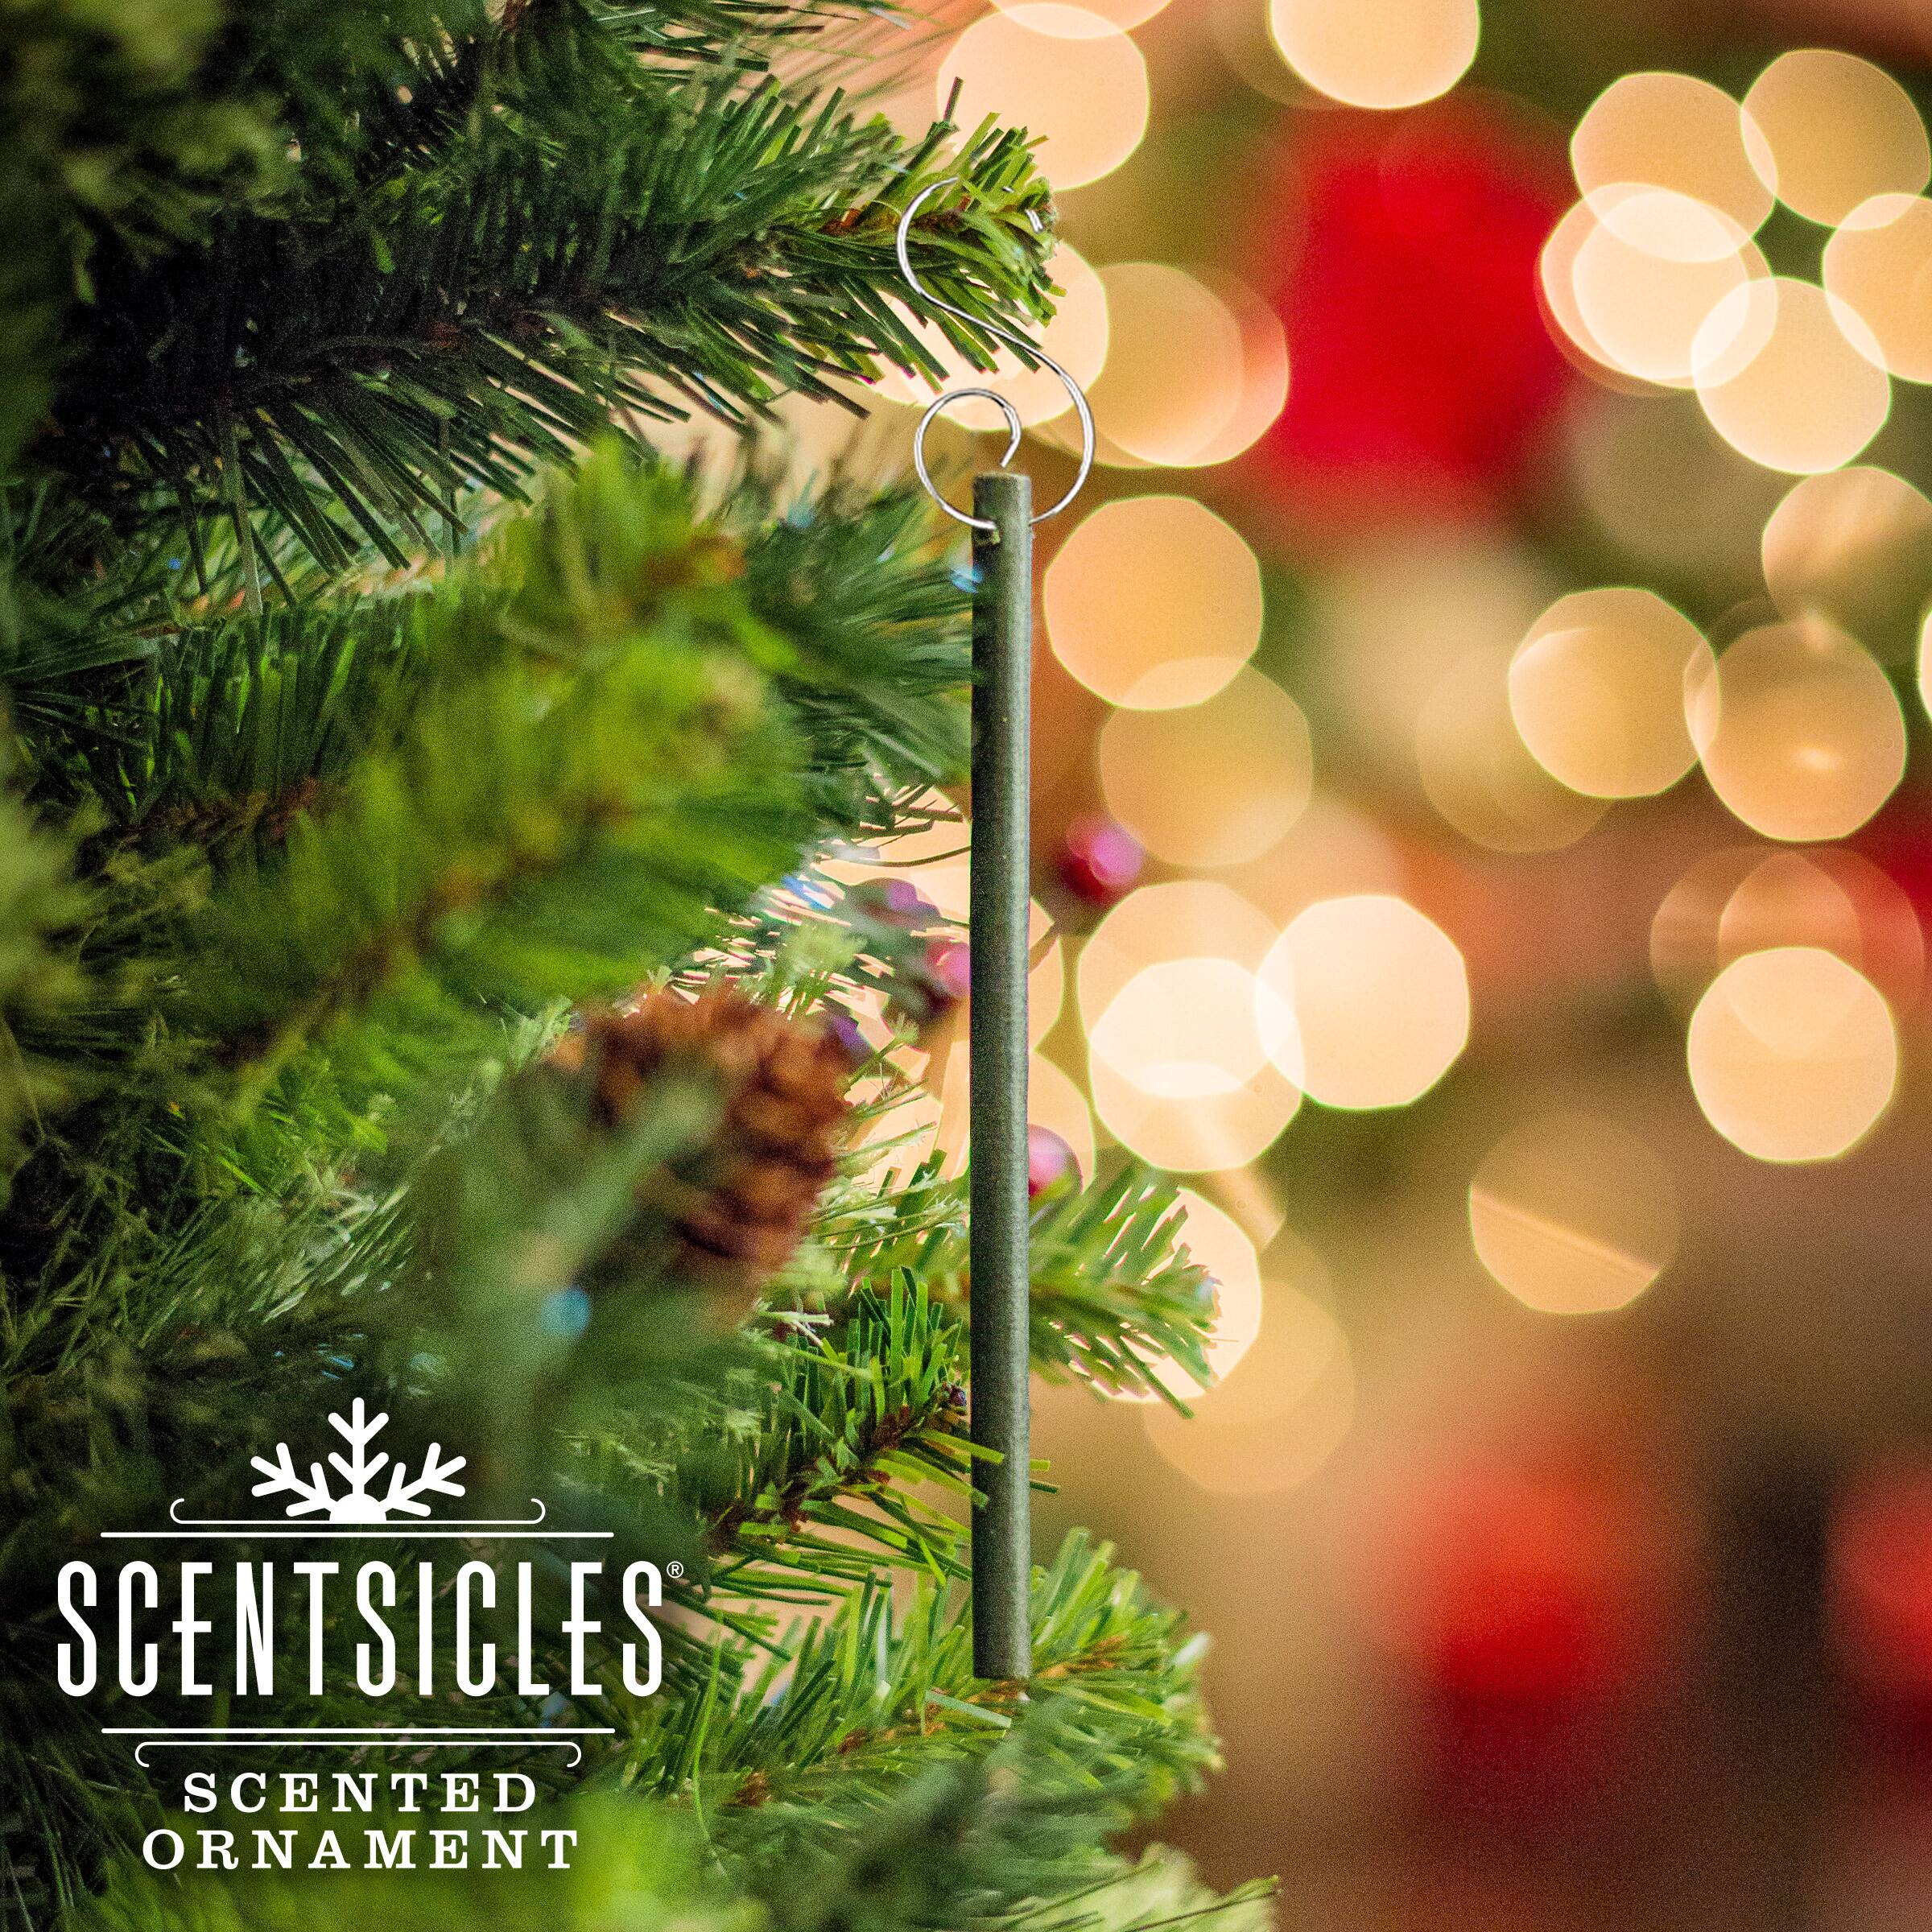 Scentsicles O Christmas Tree Scented Paper Stick Ornaments, 12ct.